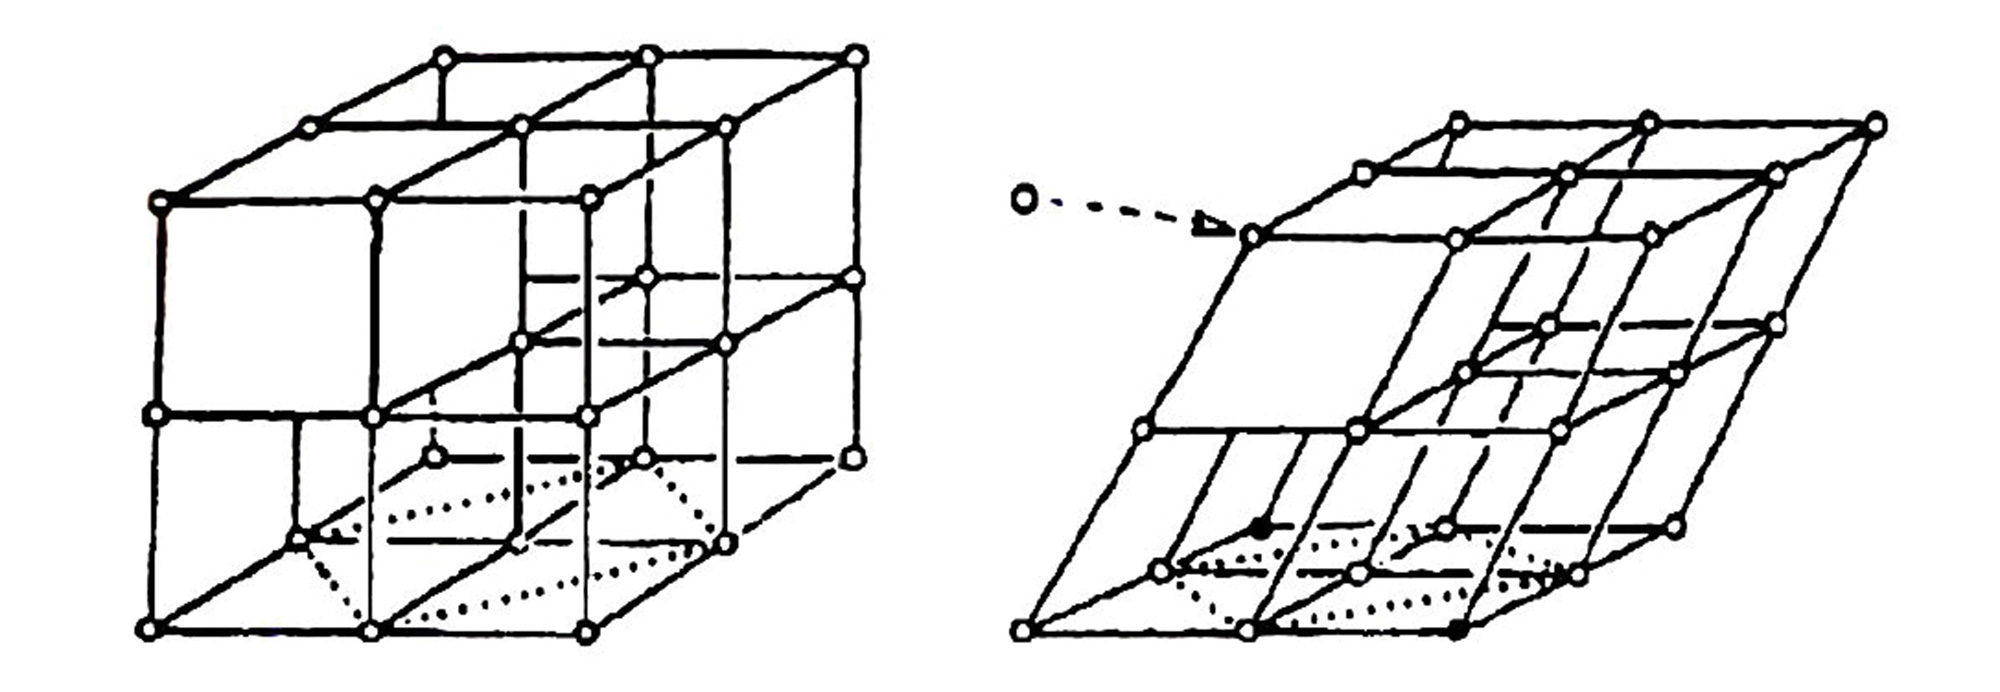 The rhombic lattice can be envisioned by “figuratively pushing the cubic lattice askew.”